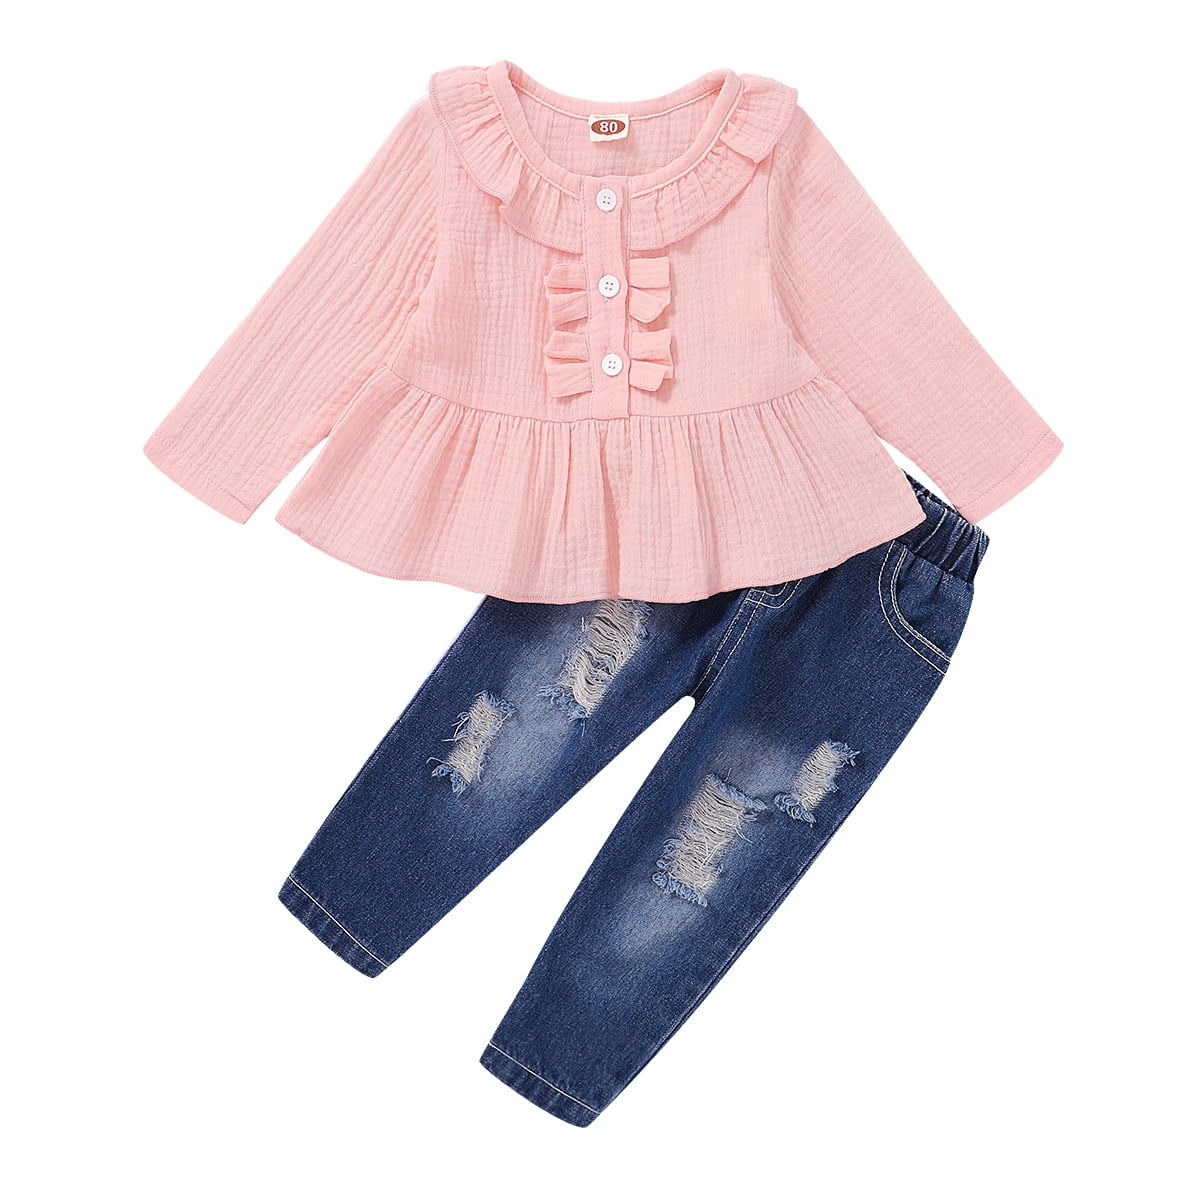 2T Baby Girls Clothes 3T Girls 2PCS Denim Outfits Set Solid Color ...